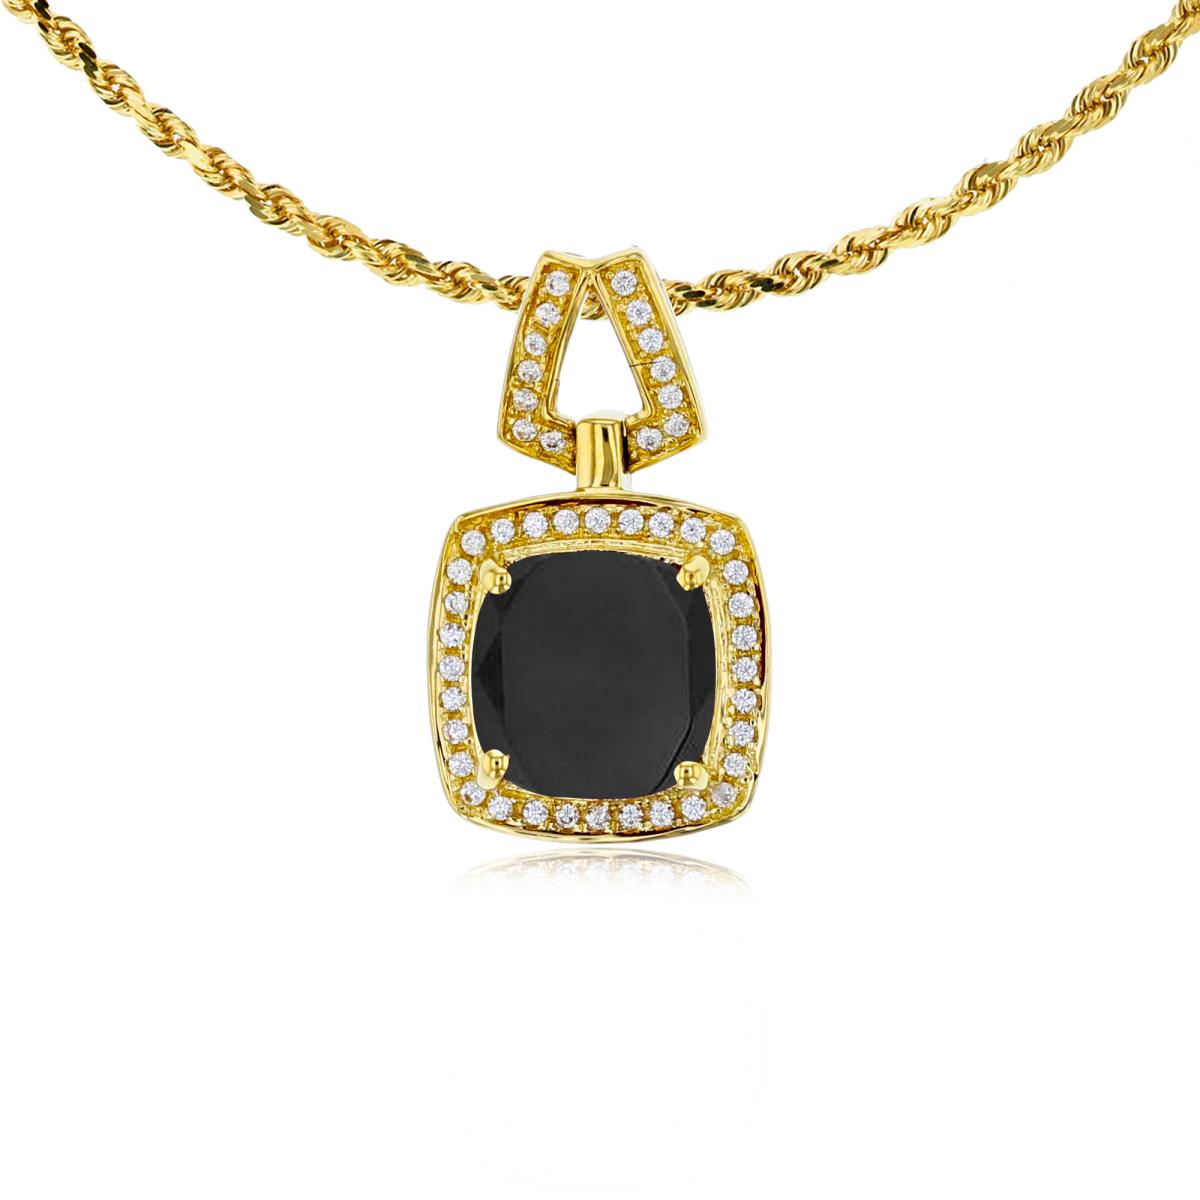 14K Yellow Gold 7mm Cushion Onyx & 0.10 CTTW Diamond Halo 18" Rope Chain Necklace